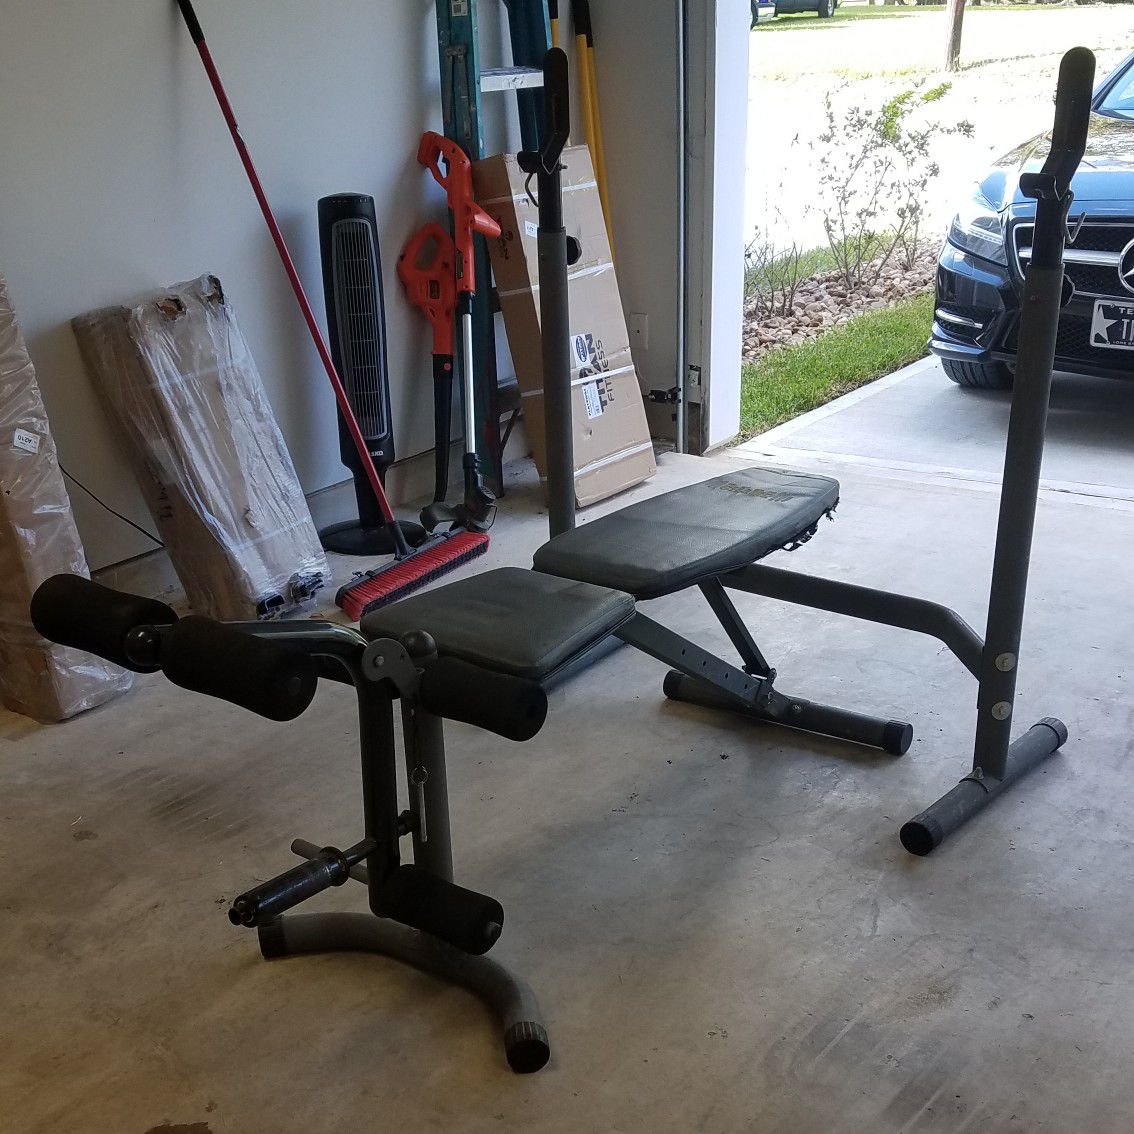 Free Weight Bench & Rack (Location in Description)